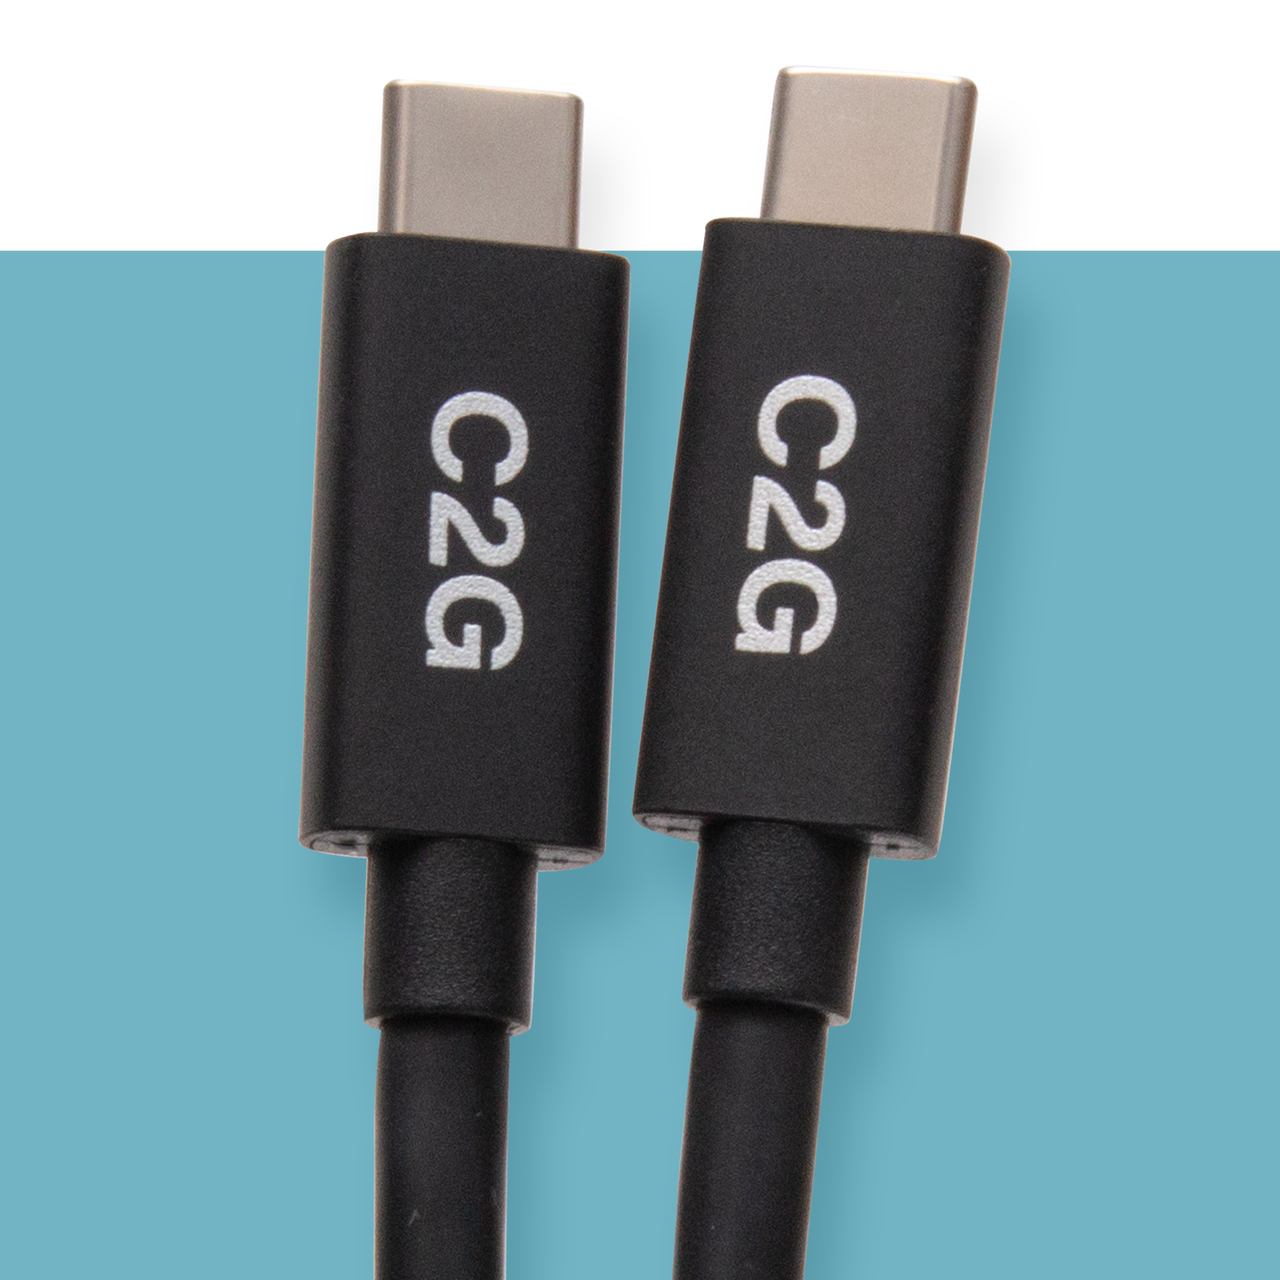 Two USB-C cables that have C2G printed on them on a blue background